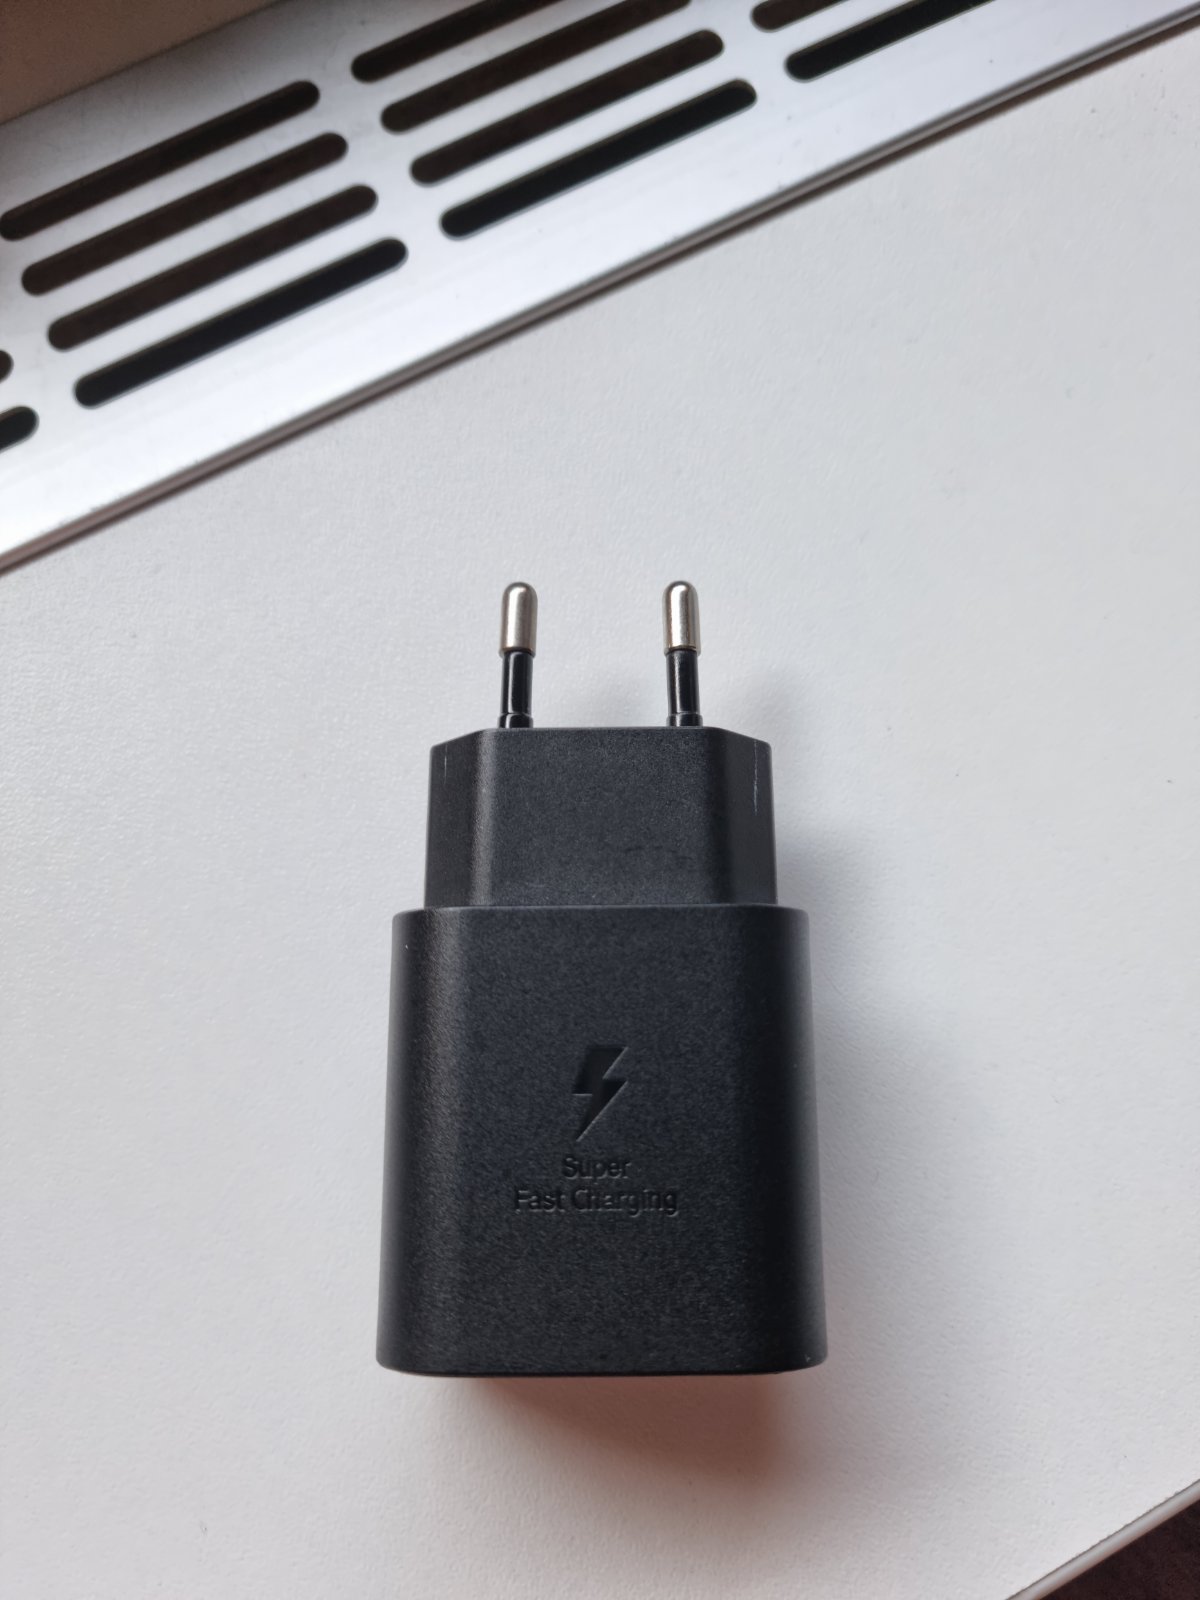 Is this charger fake? - Samsung Community